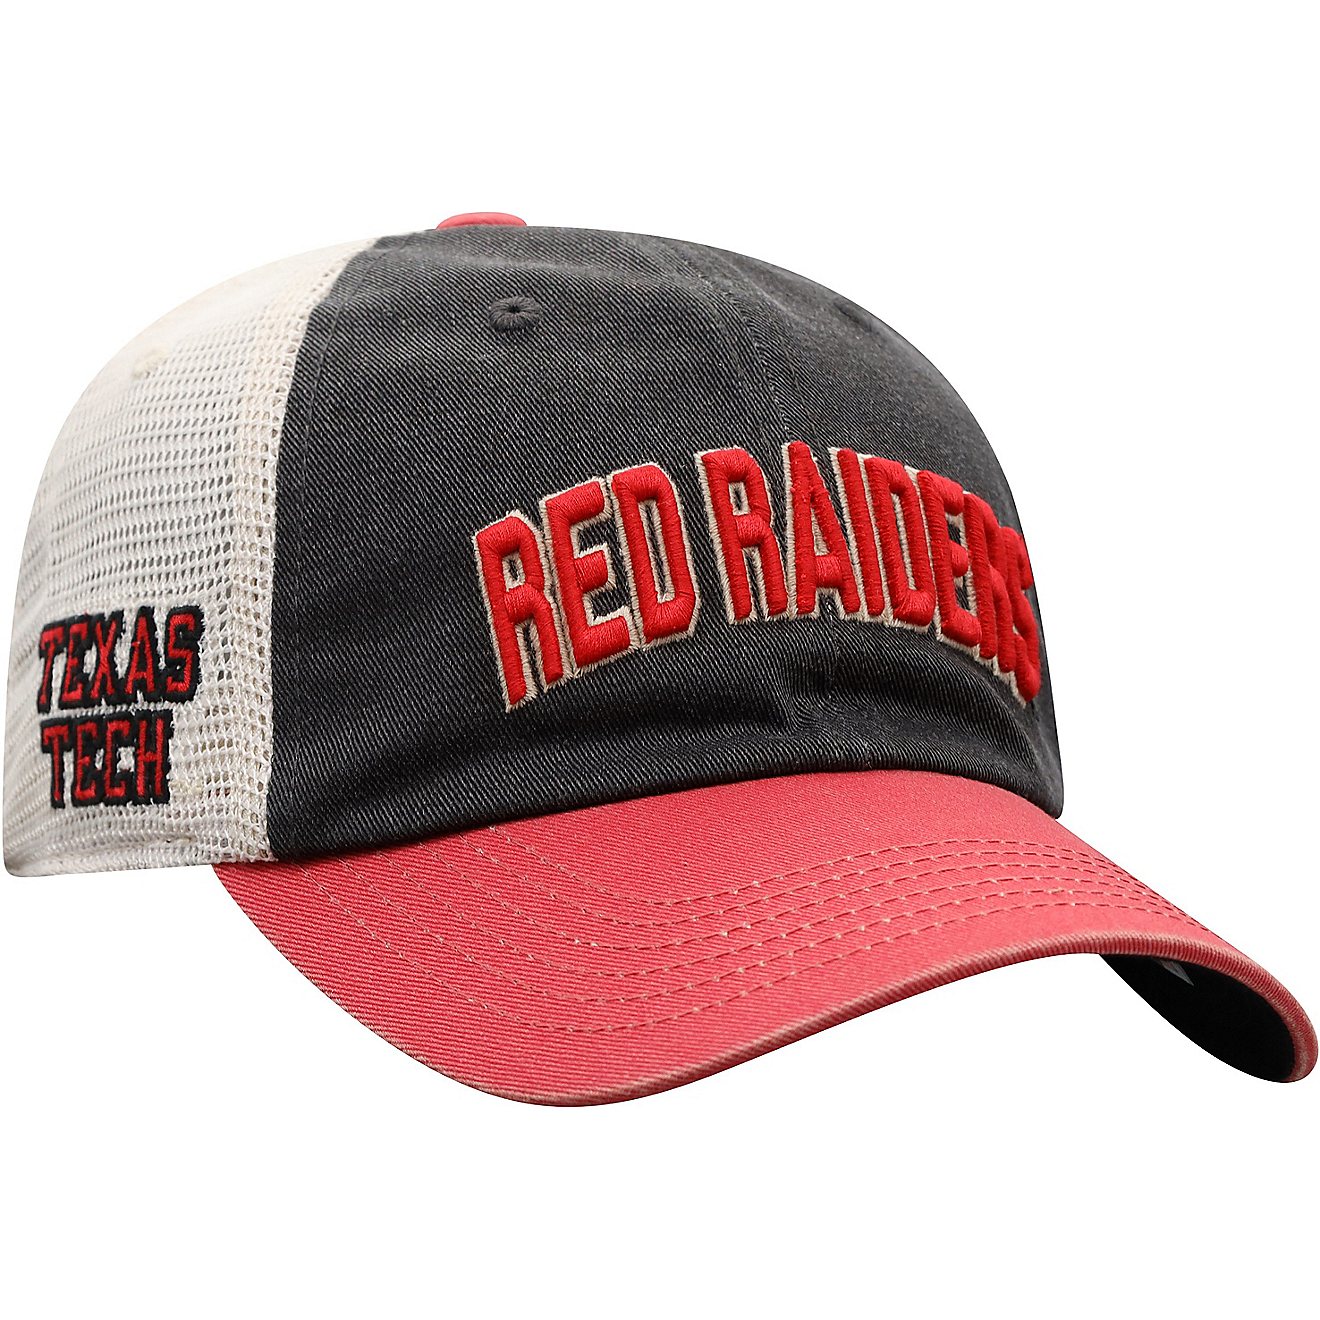 Top of the World Men's Texas Tech University Andy 3-Tone Cap                                                                     - view number 1